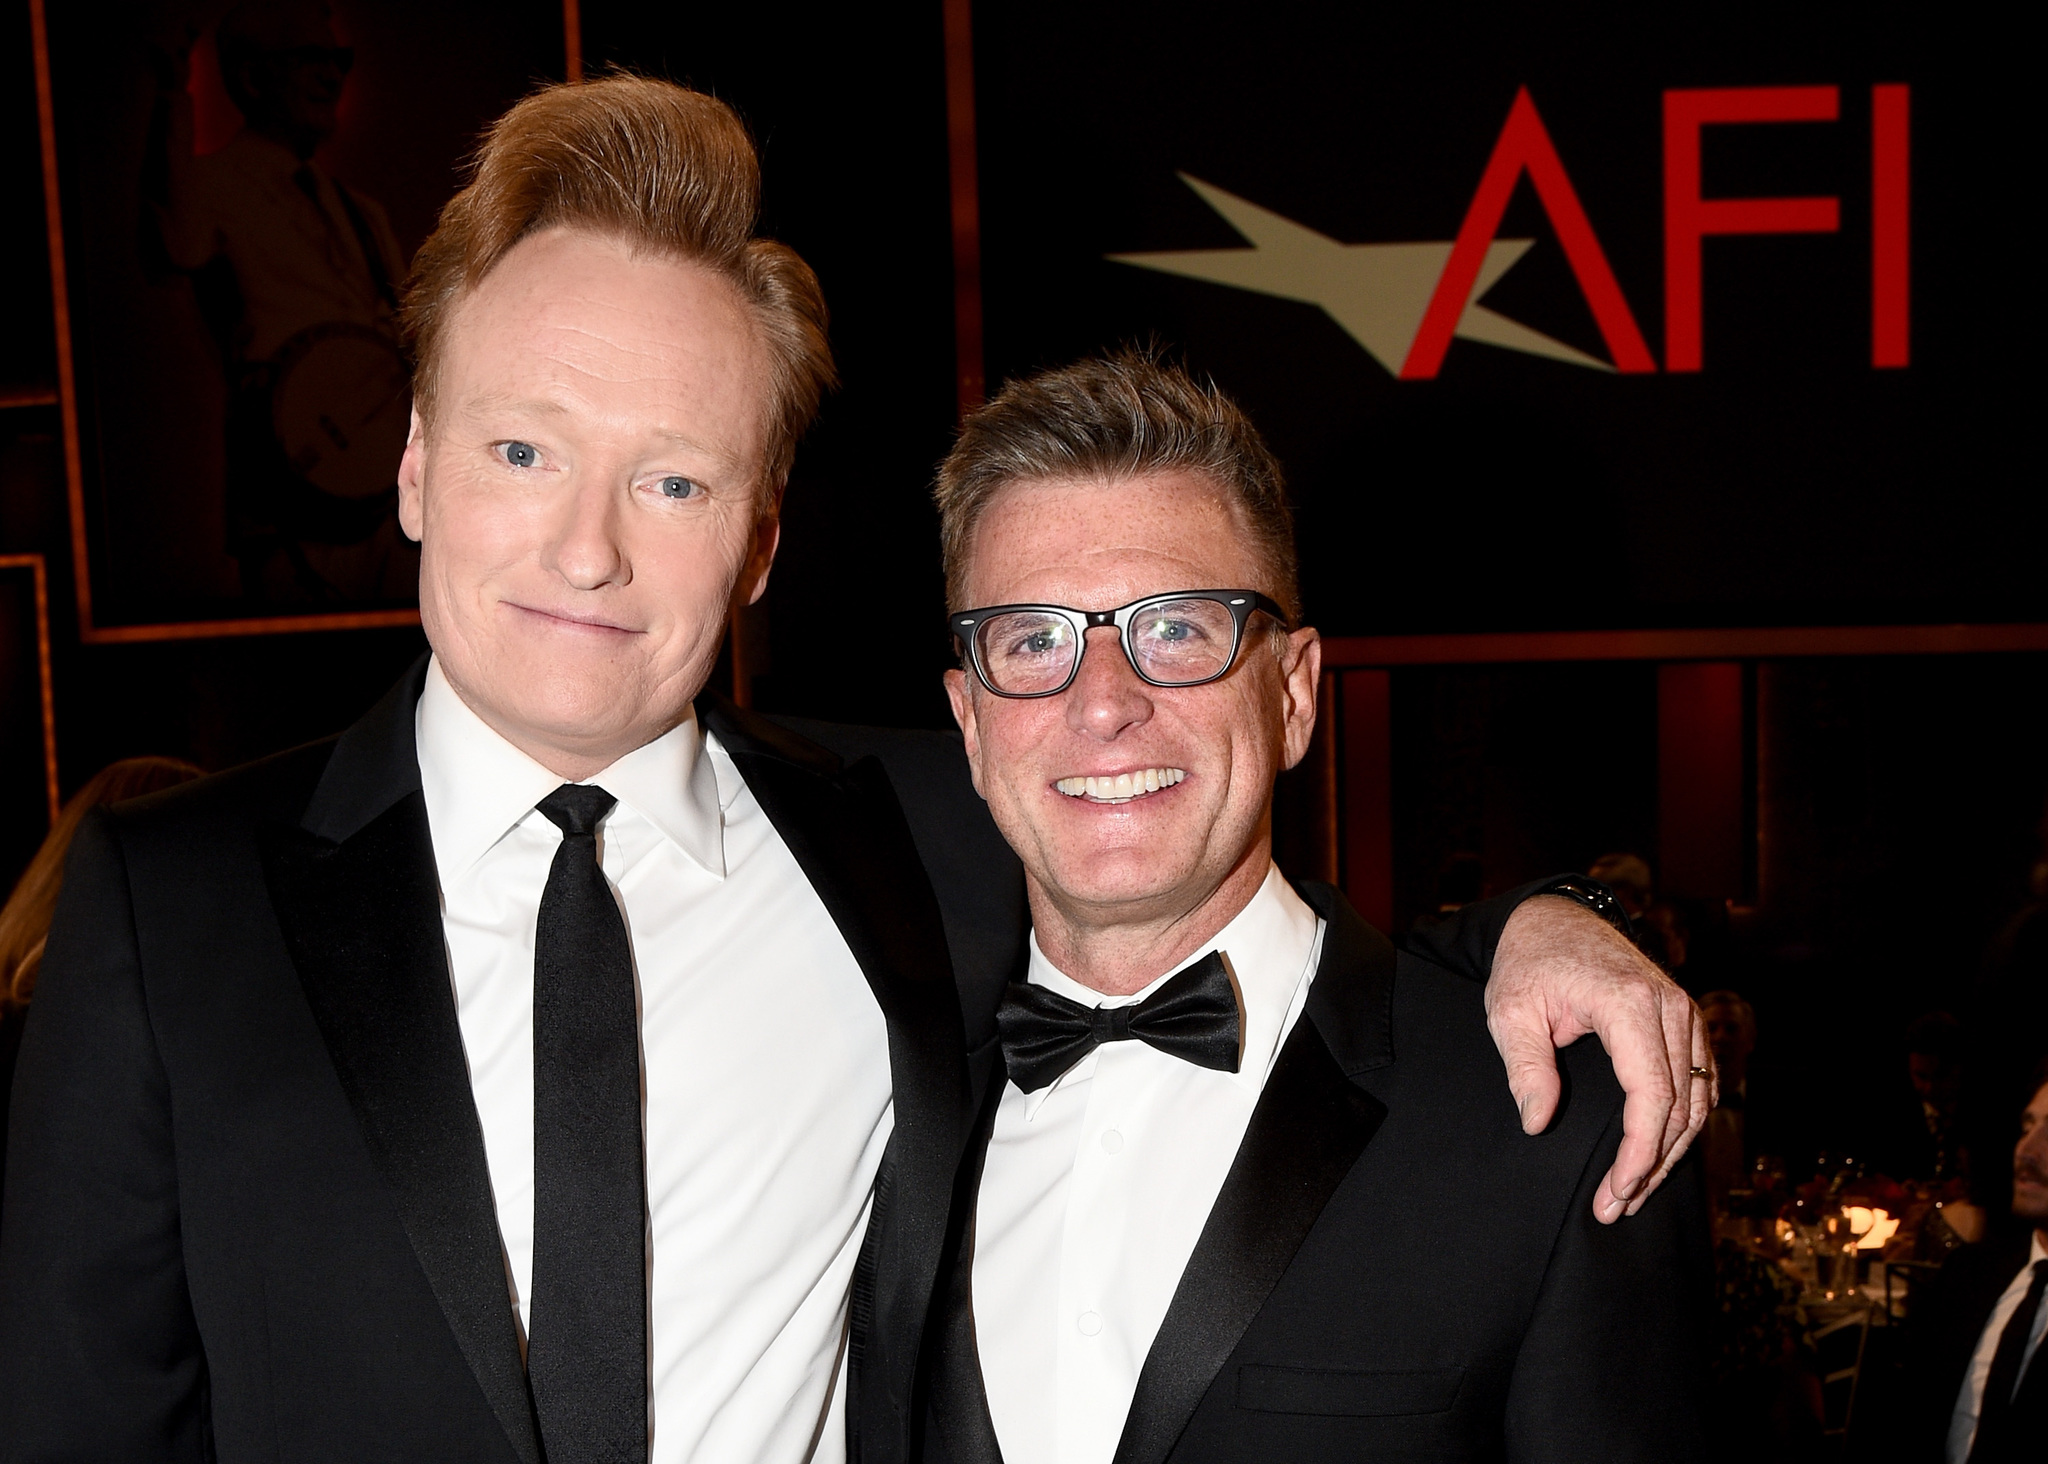 Conan O'Brien and Kevin Reilly